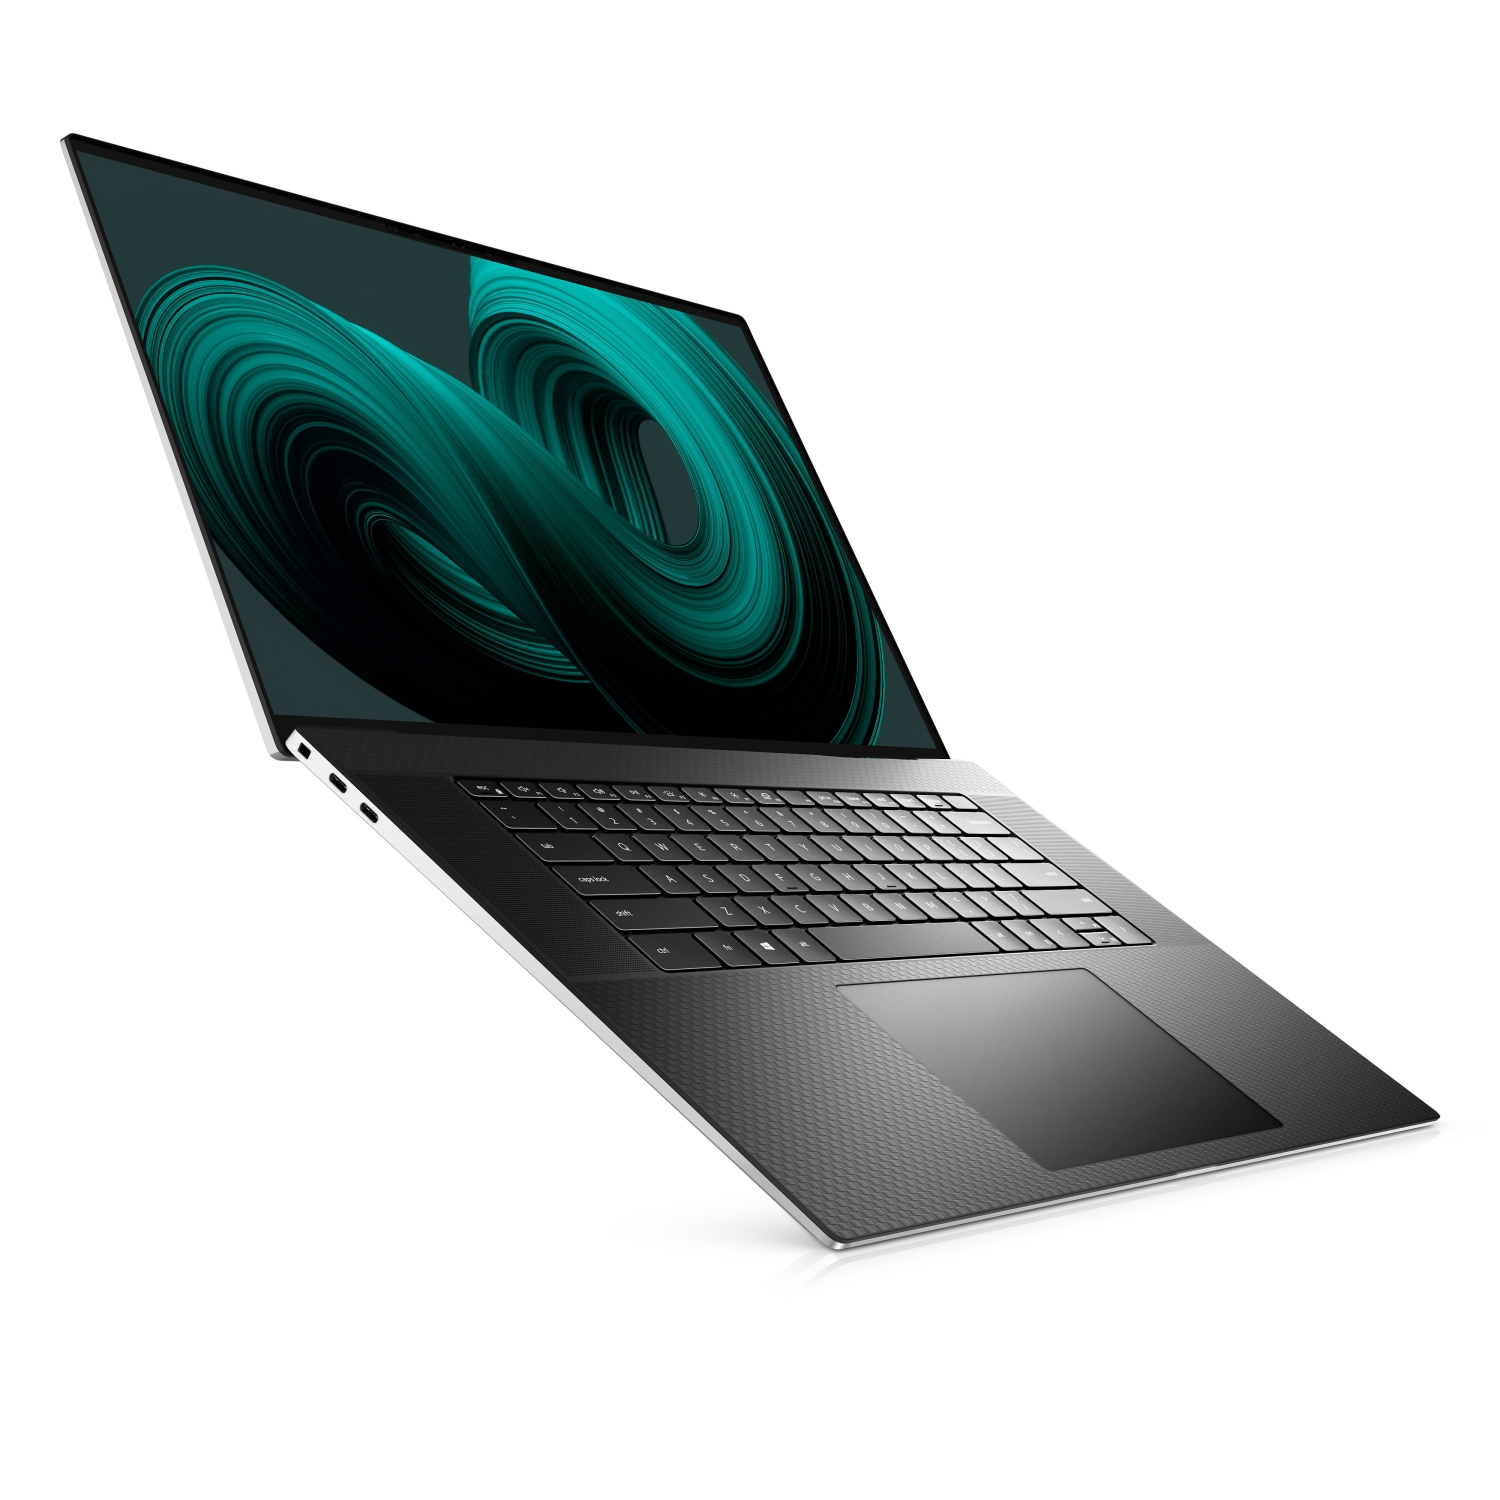 Refurbished (Excellent) - Dell XPS 17 9710 Laptop (2021) | 17" 4K Touch | Core i9 - 4TB SSD - 32GB RAM - RTX 3060 | 8 Cores @ 4.9 GHz - 11th Gen CPU Certified Refurbished